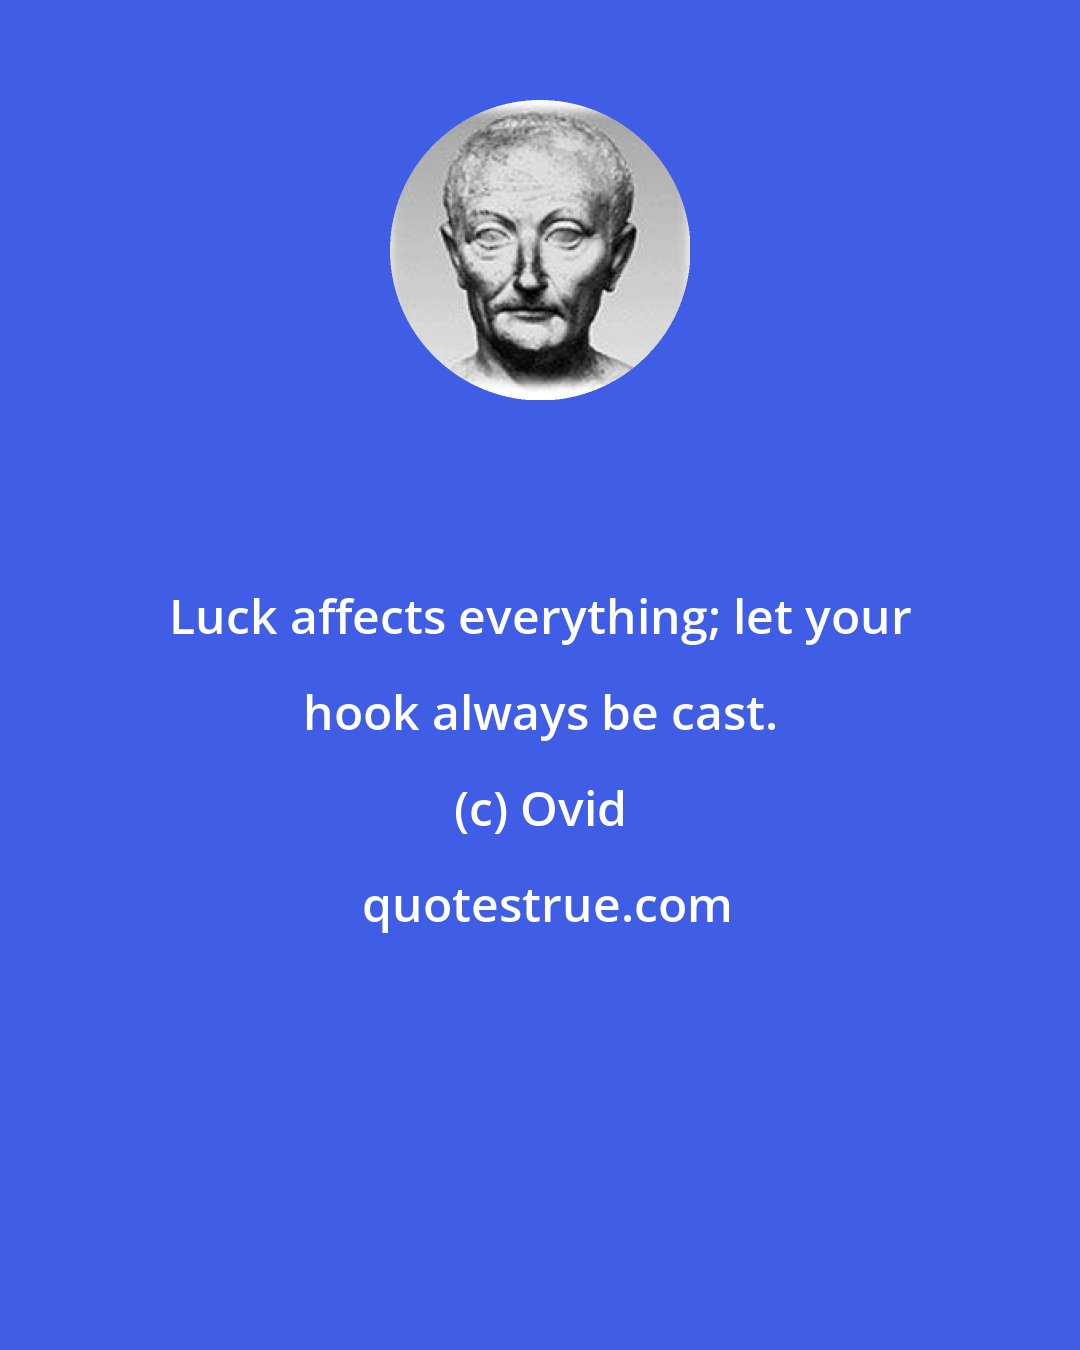 Ovid: Luck affects everything; let your hook always be cast.